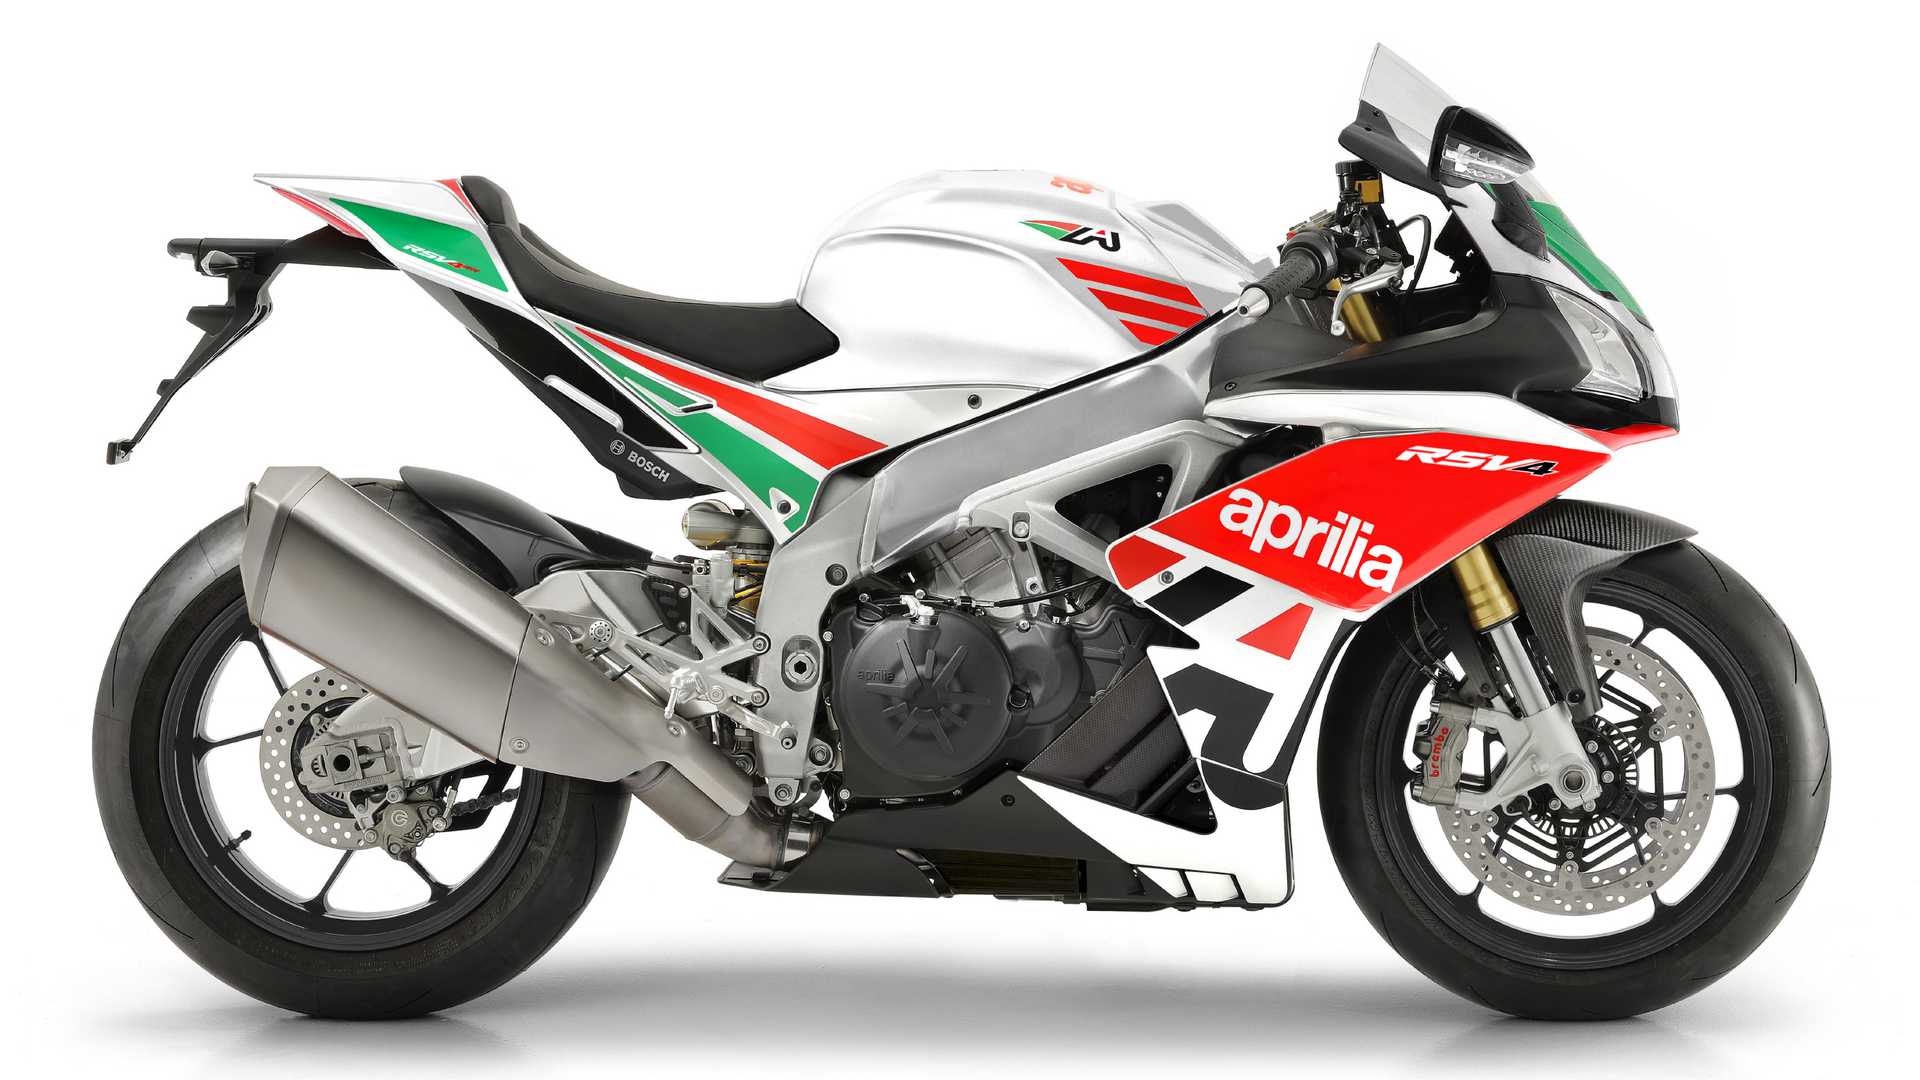 #Aprilia RSV4 RR and Tuono RR 1100 #MisanoLimitedEditions
- also in the app Motorcycle News